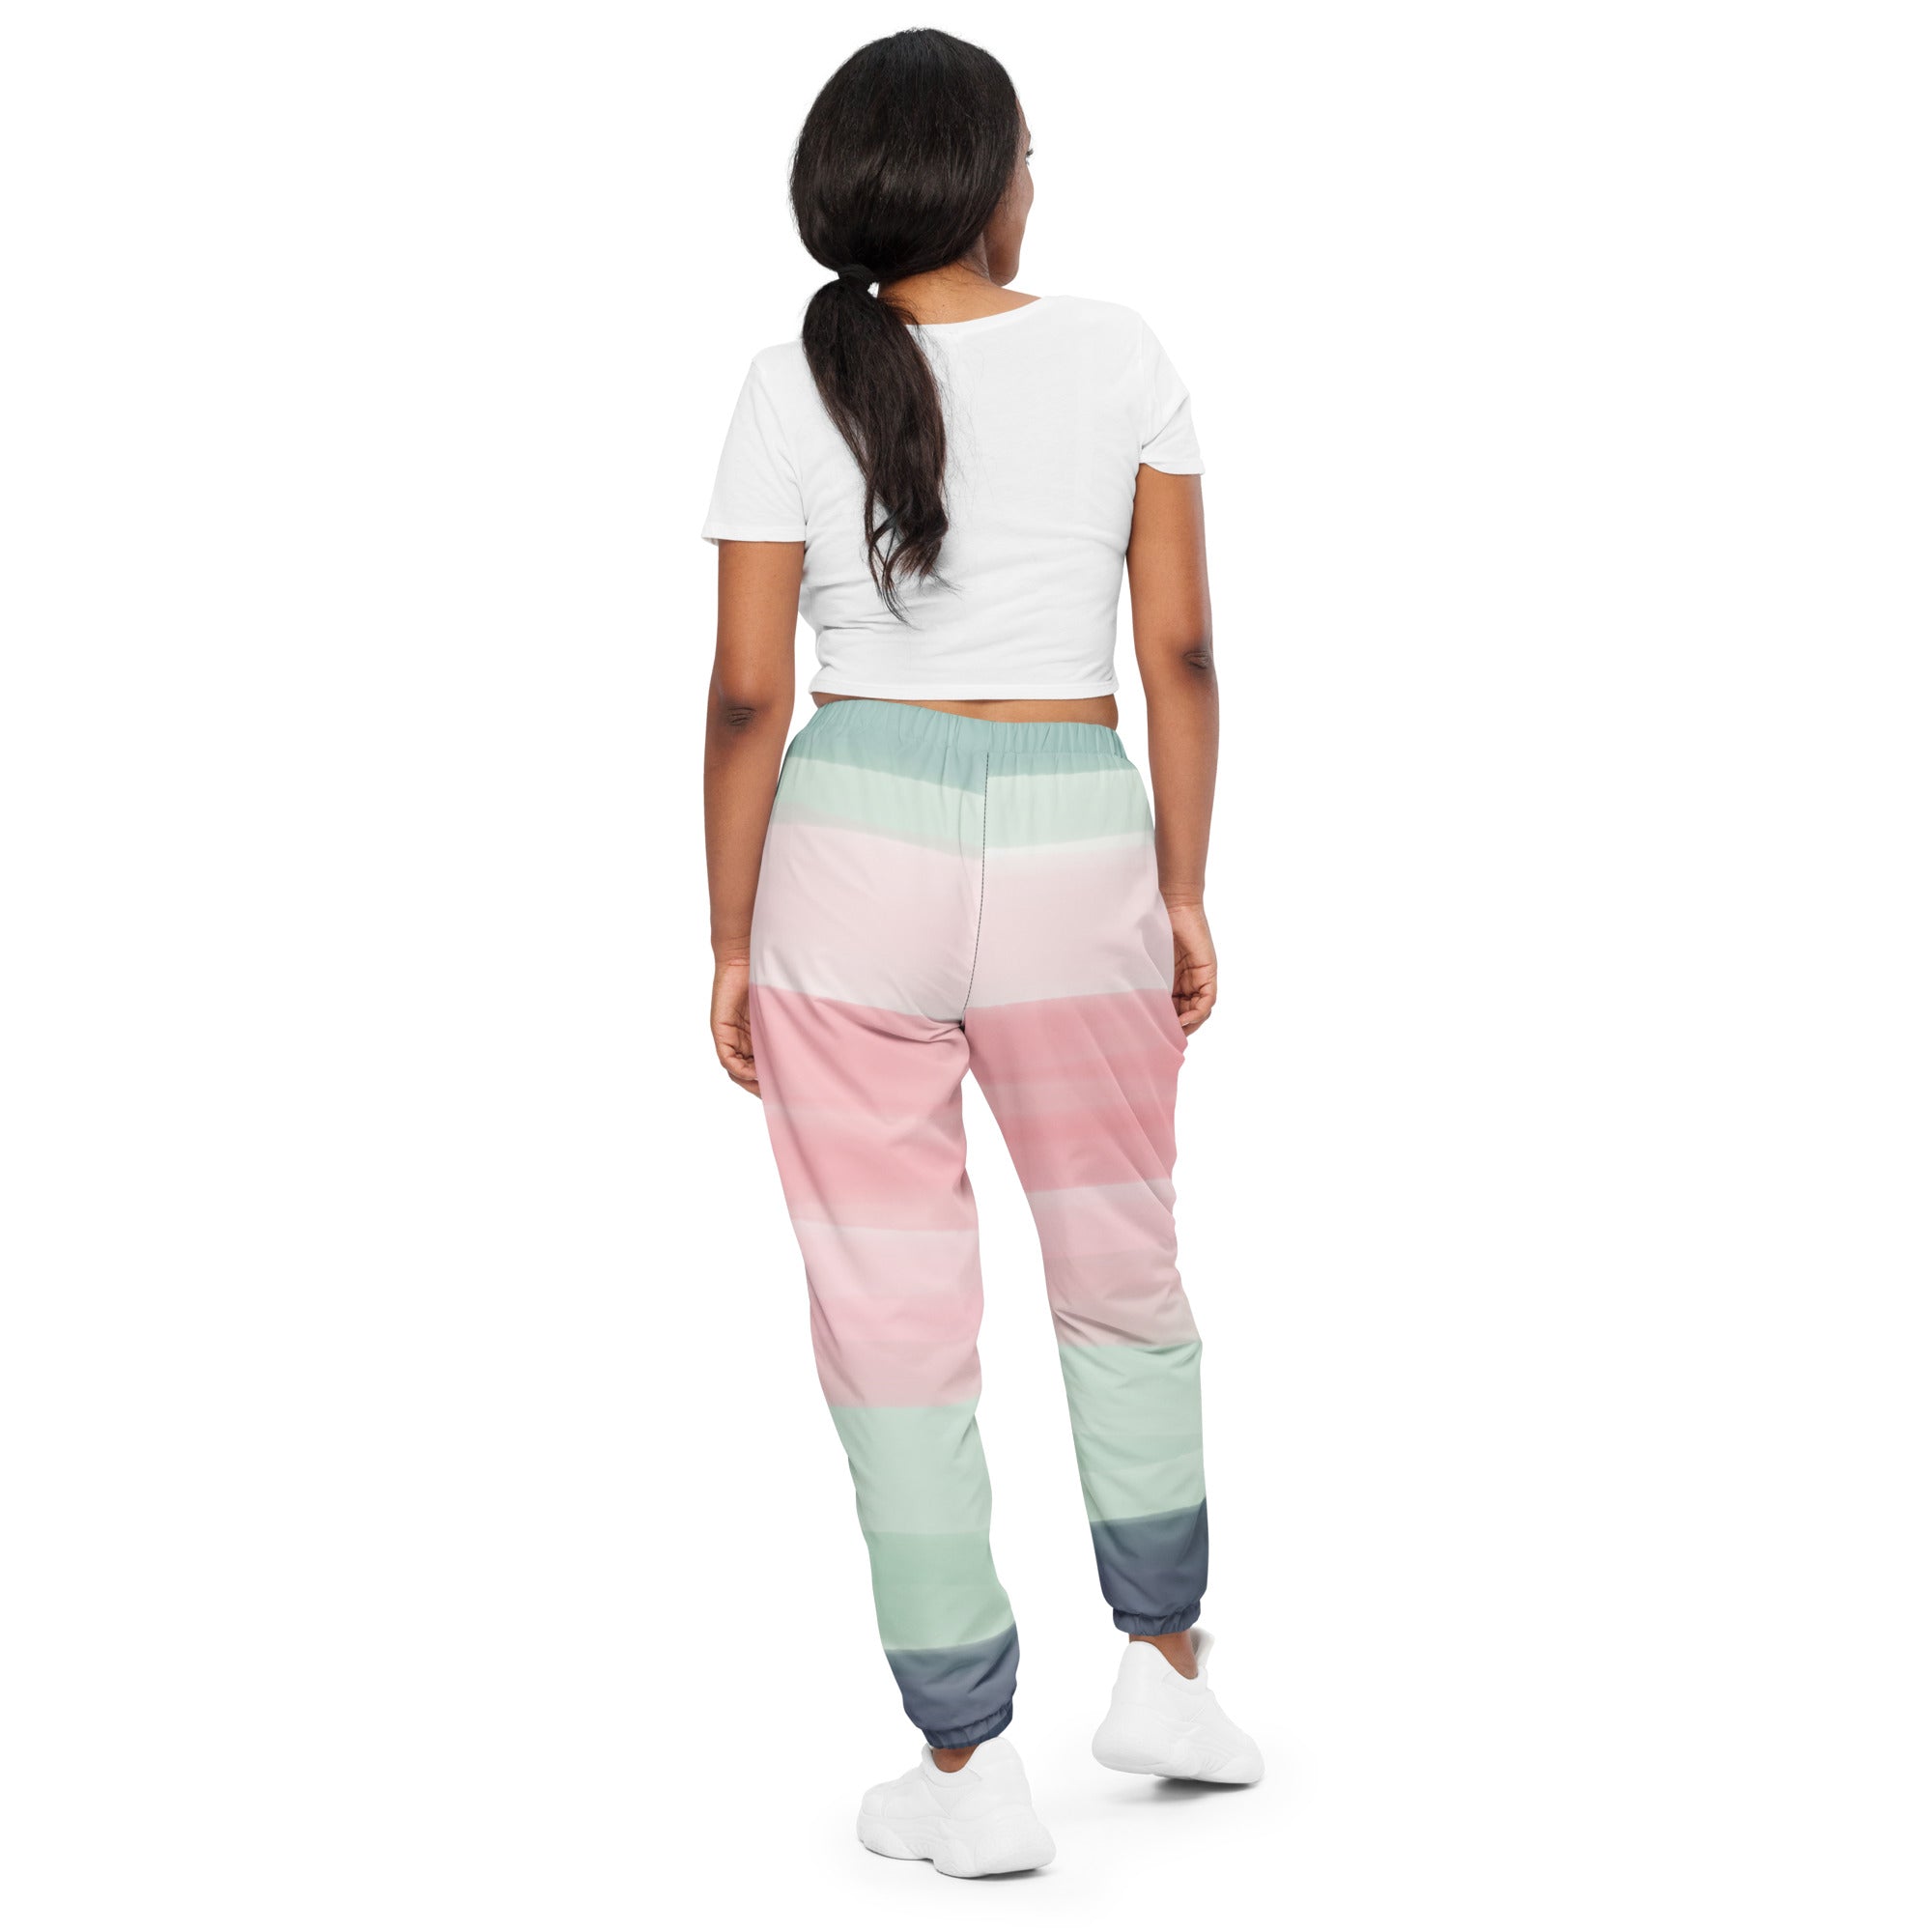 Unisex track pants - summer colorful yoga outfit - Personal Hour for Yoga and Meditations 